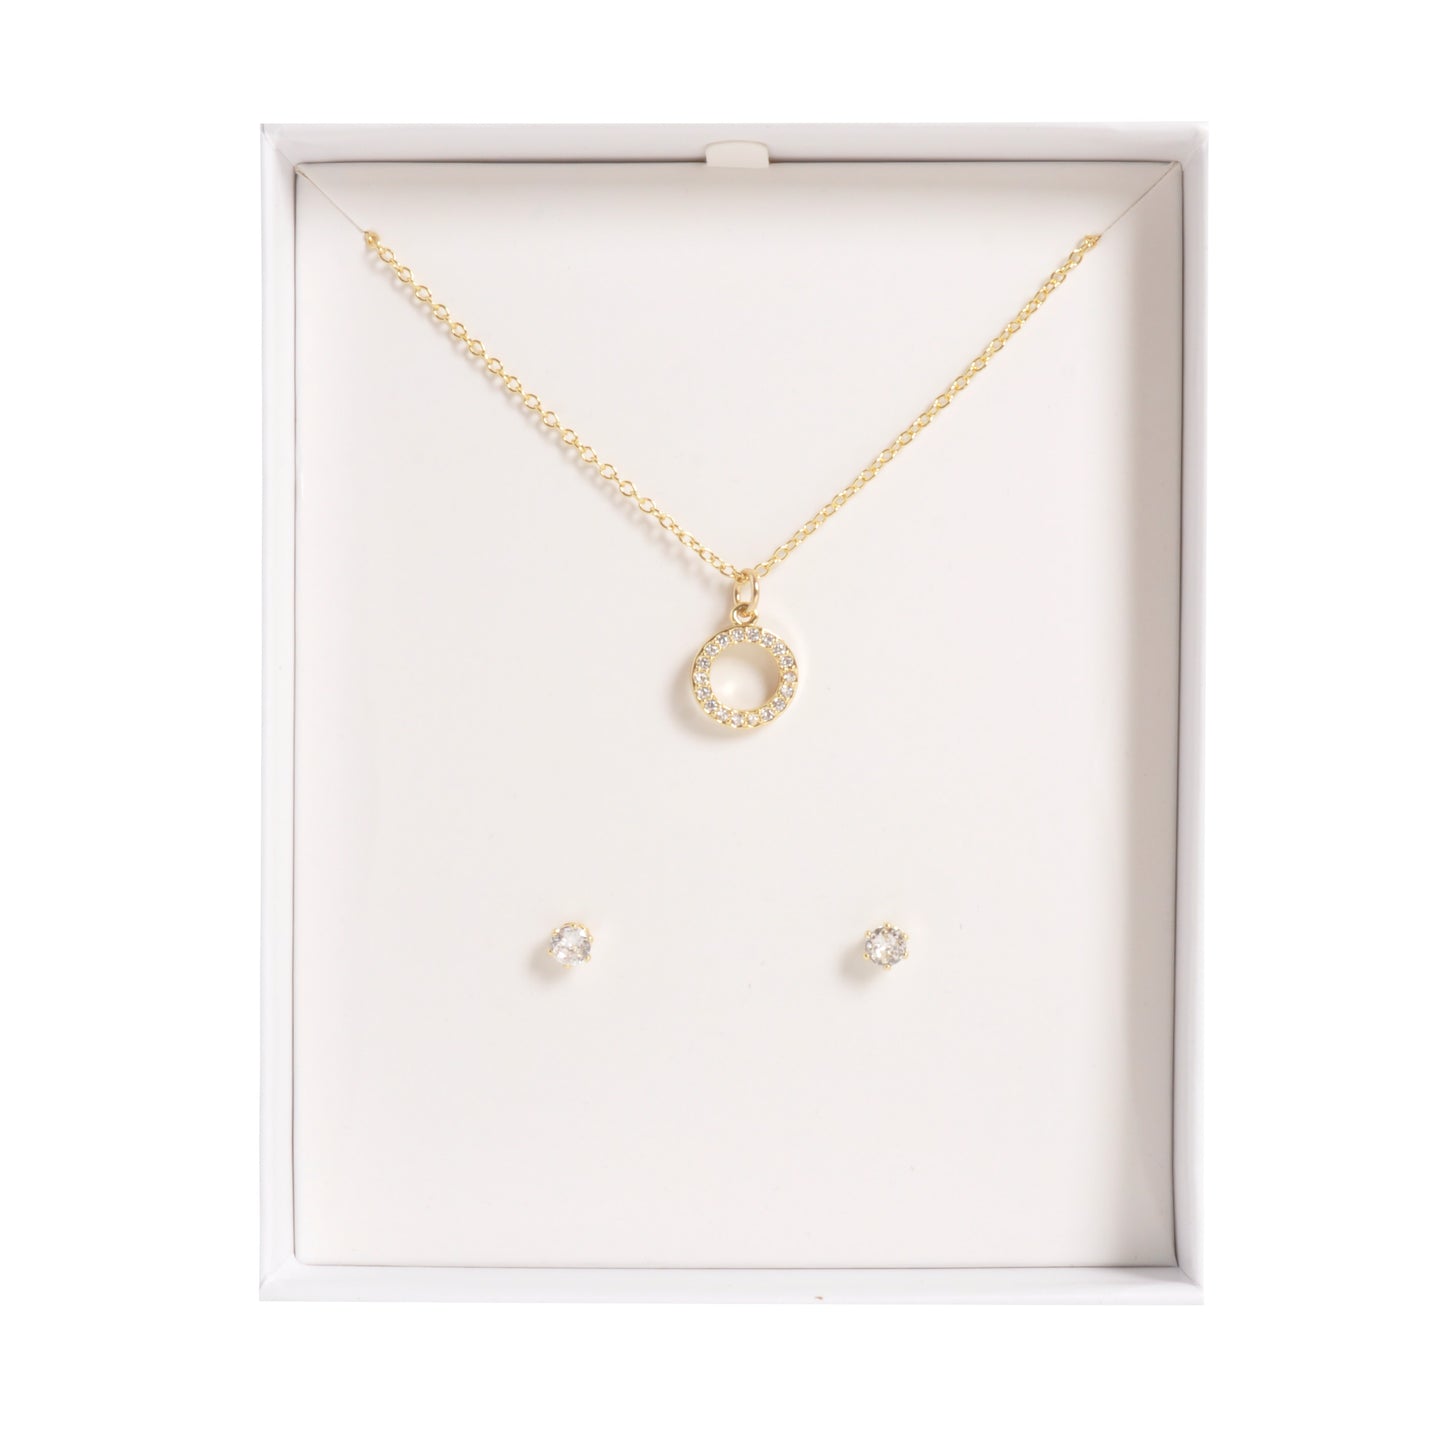 Necklace & Earring Set - GOLD CIRCLE